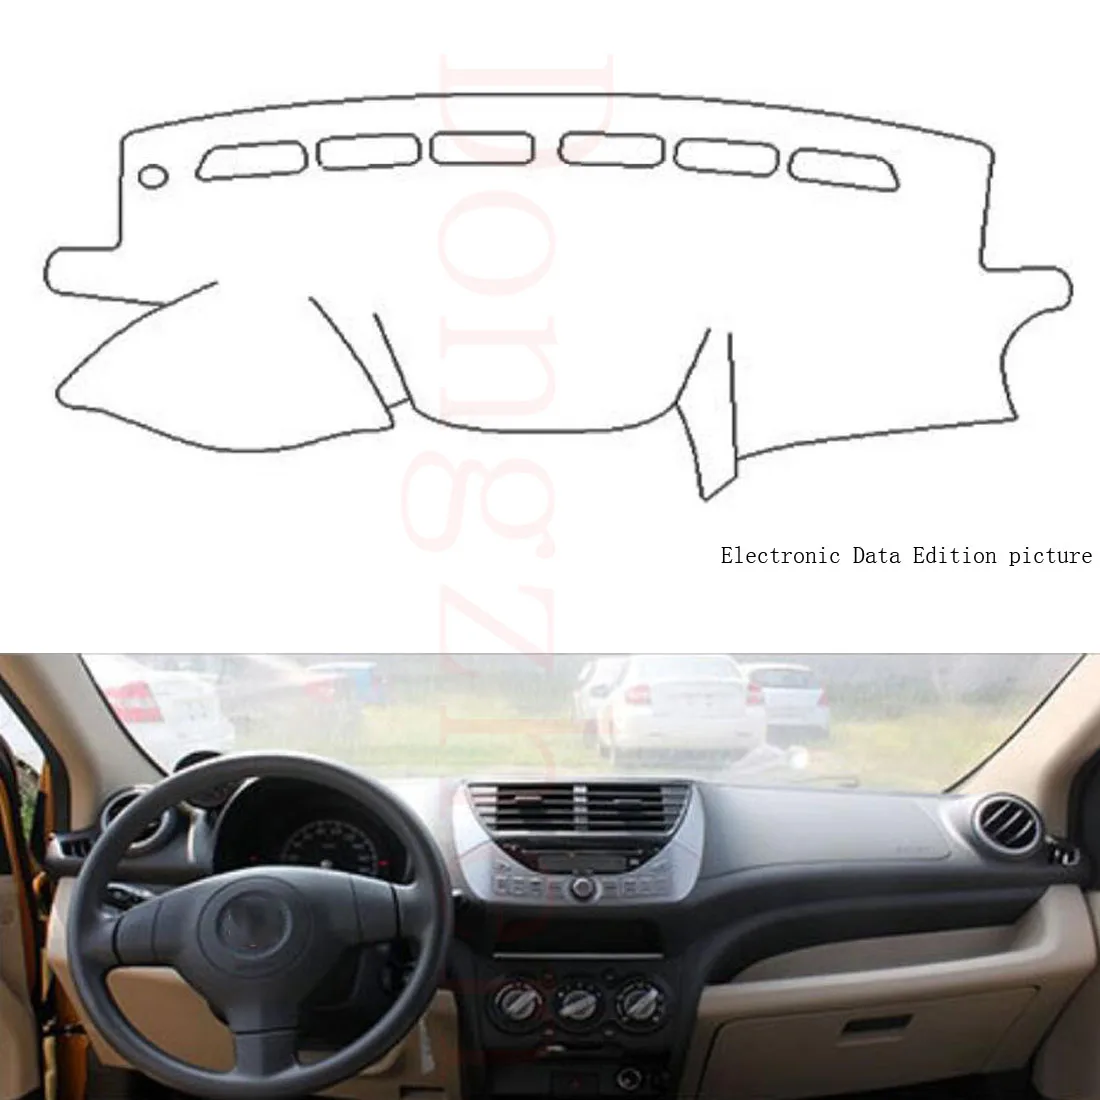 

Dongzhen Fit For SUZUKI Alto 2009 to 2016 Car Dashboard Cover Avoid Light Pad Instrument Platform Dash Board Cover Car Styling